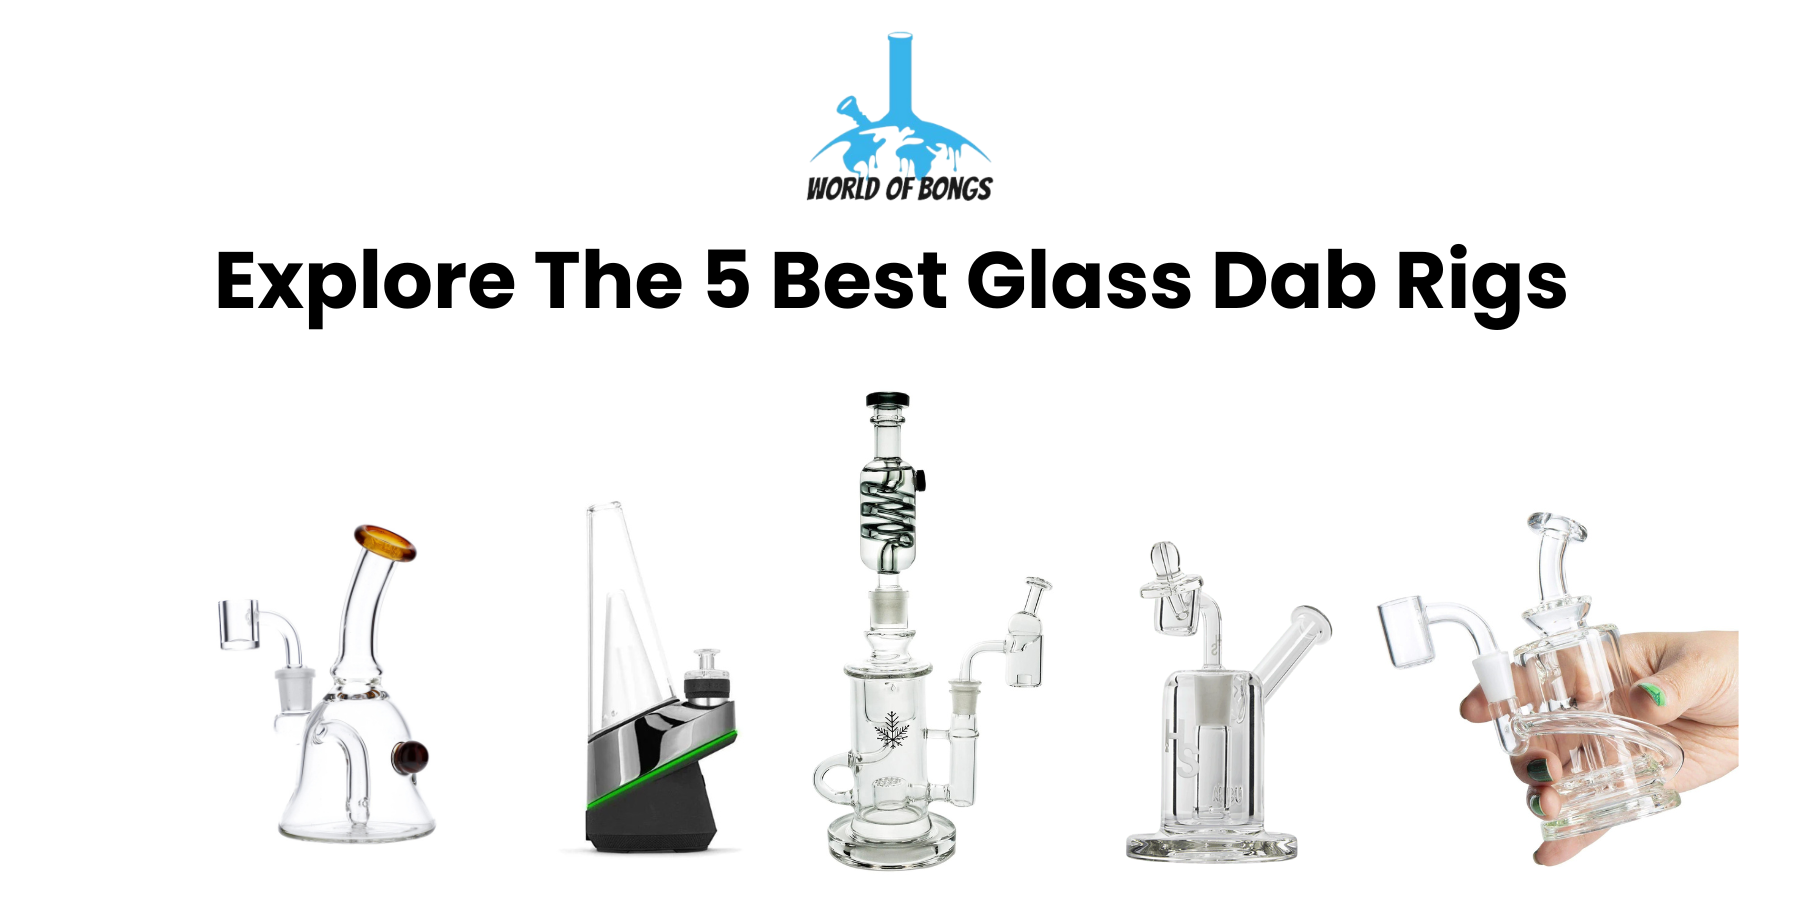 Beginner's Guide to Dab Rigs